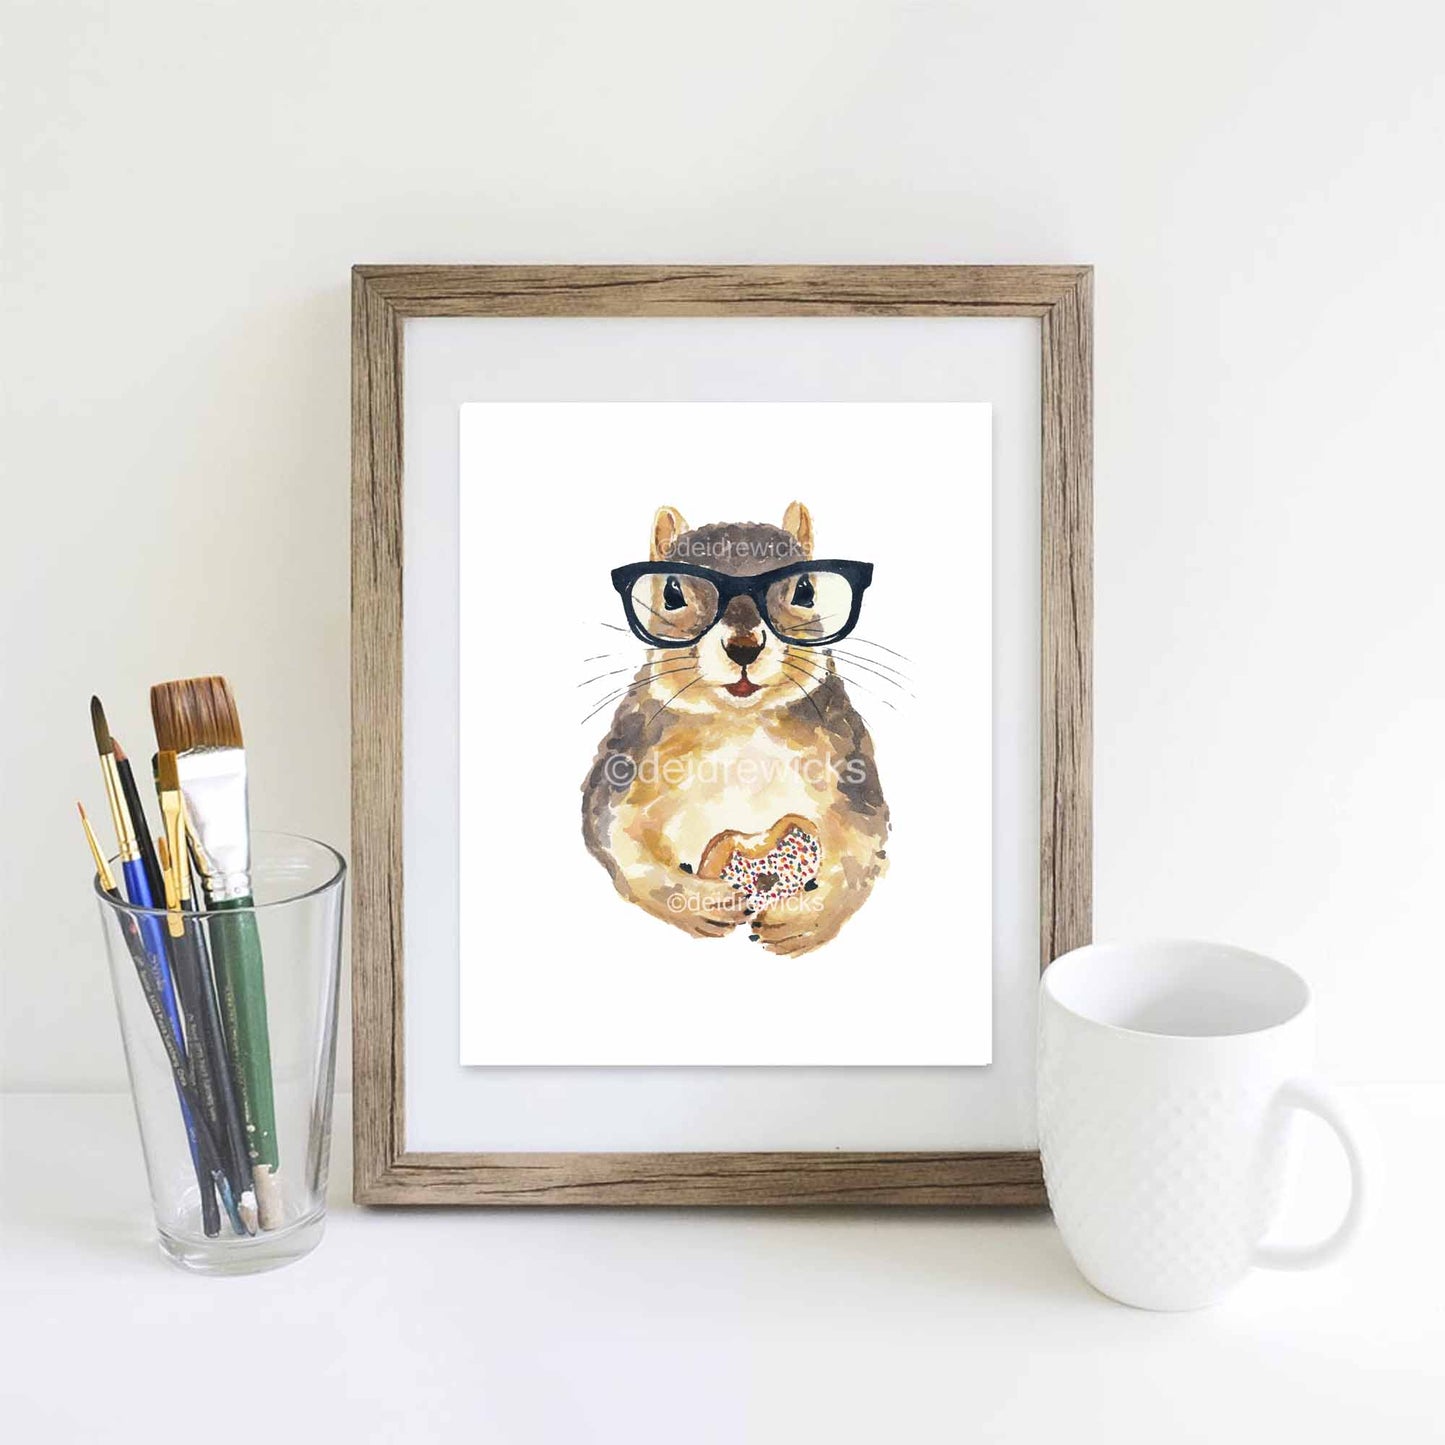 Suggested framing of your squirrel watercolor print by Deidre Wicks